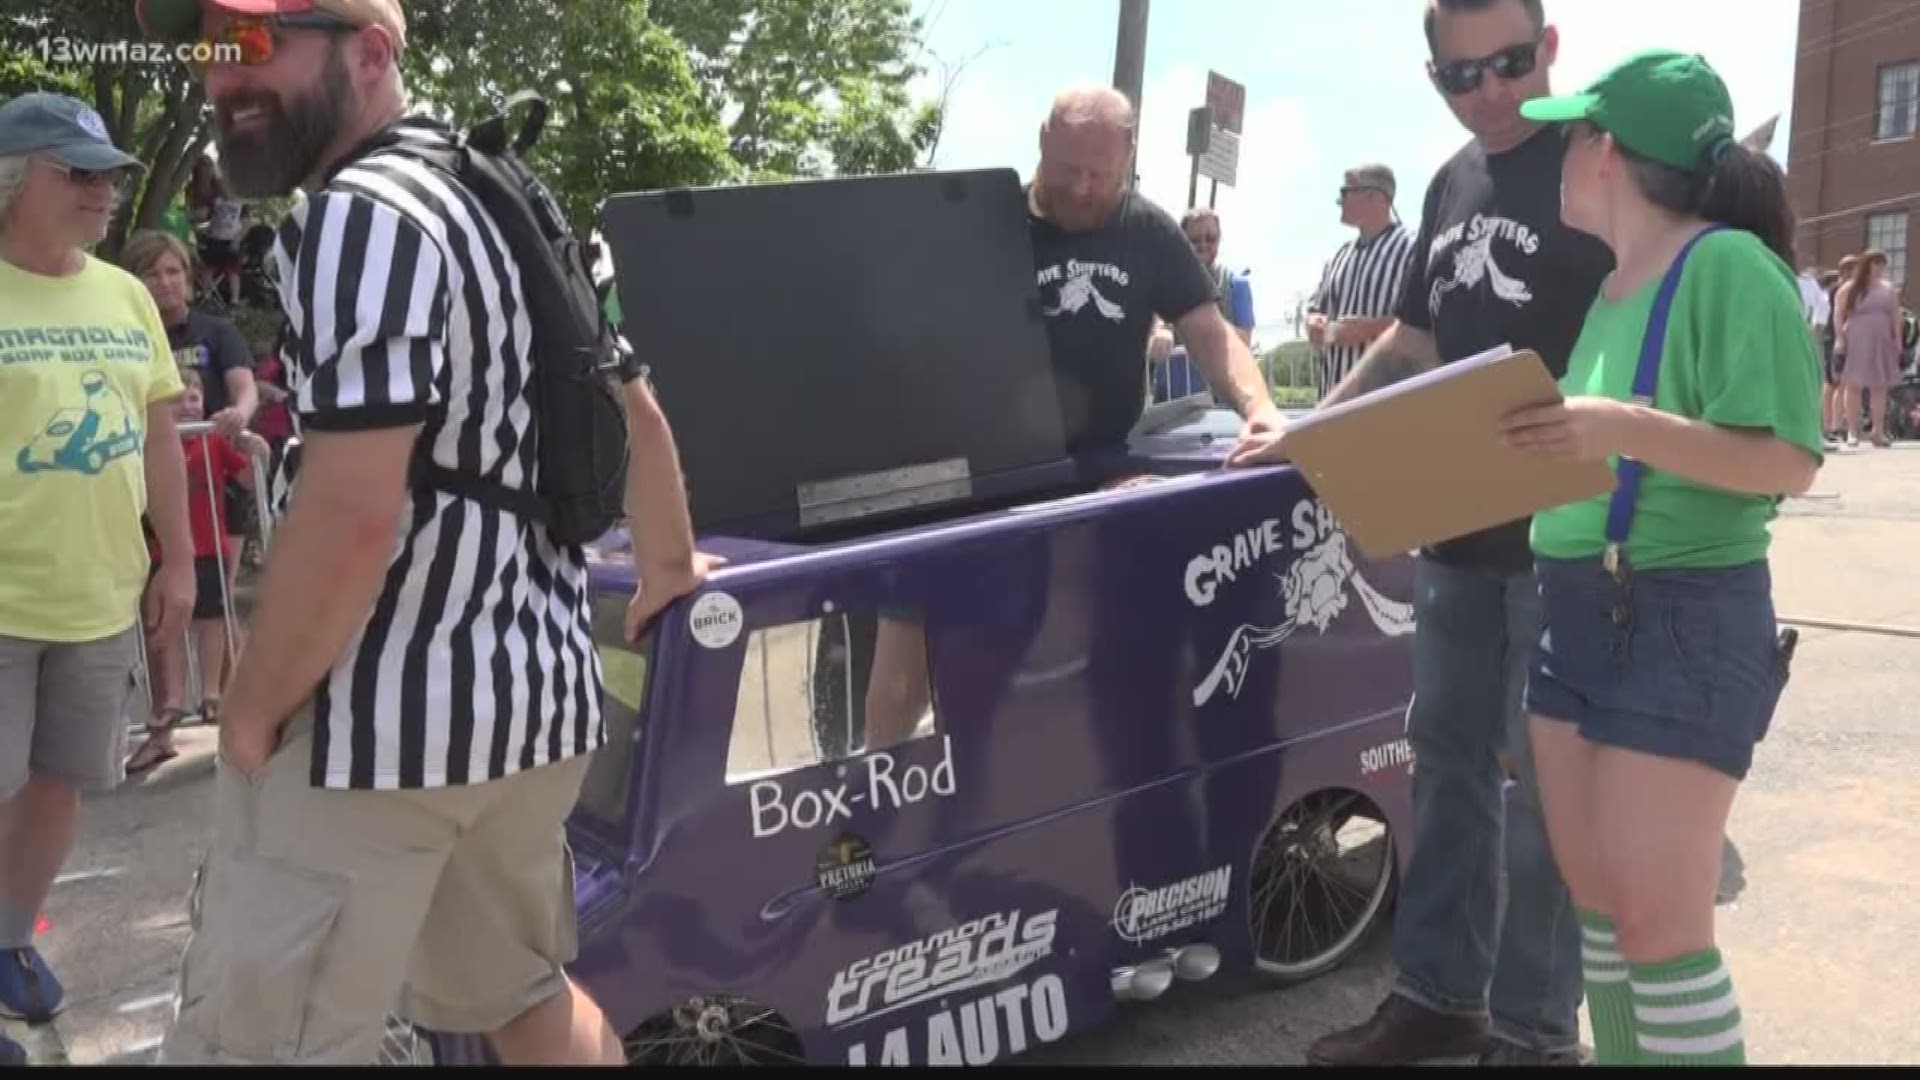 People gathered on Magnolia Street in Macon near Washington Park on Saturday to watch soap boxes speed down the hill. The family-friendly event also hosted several food trucks and vendors.